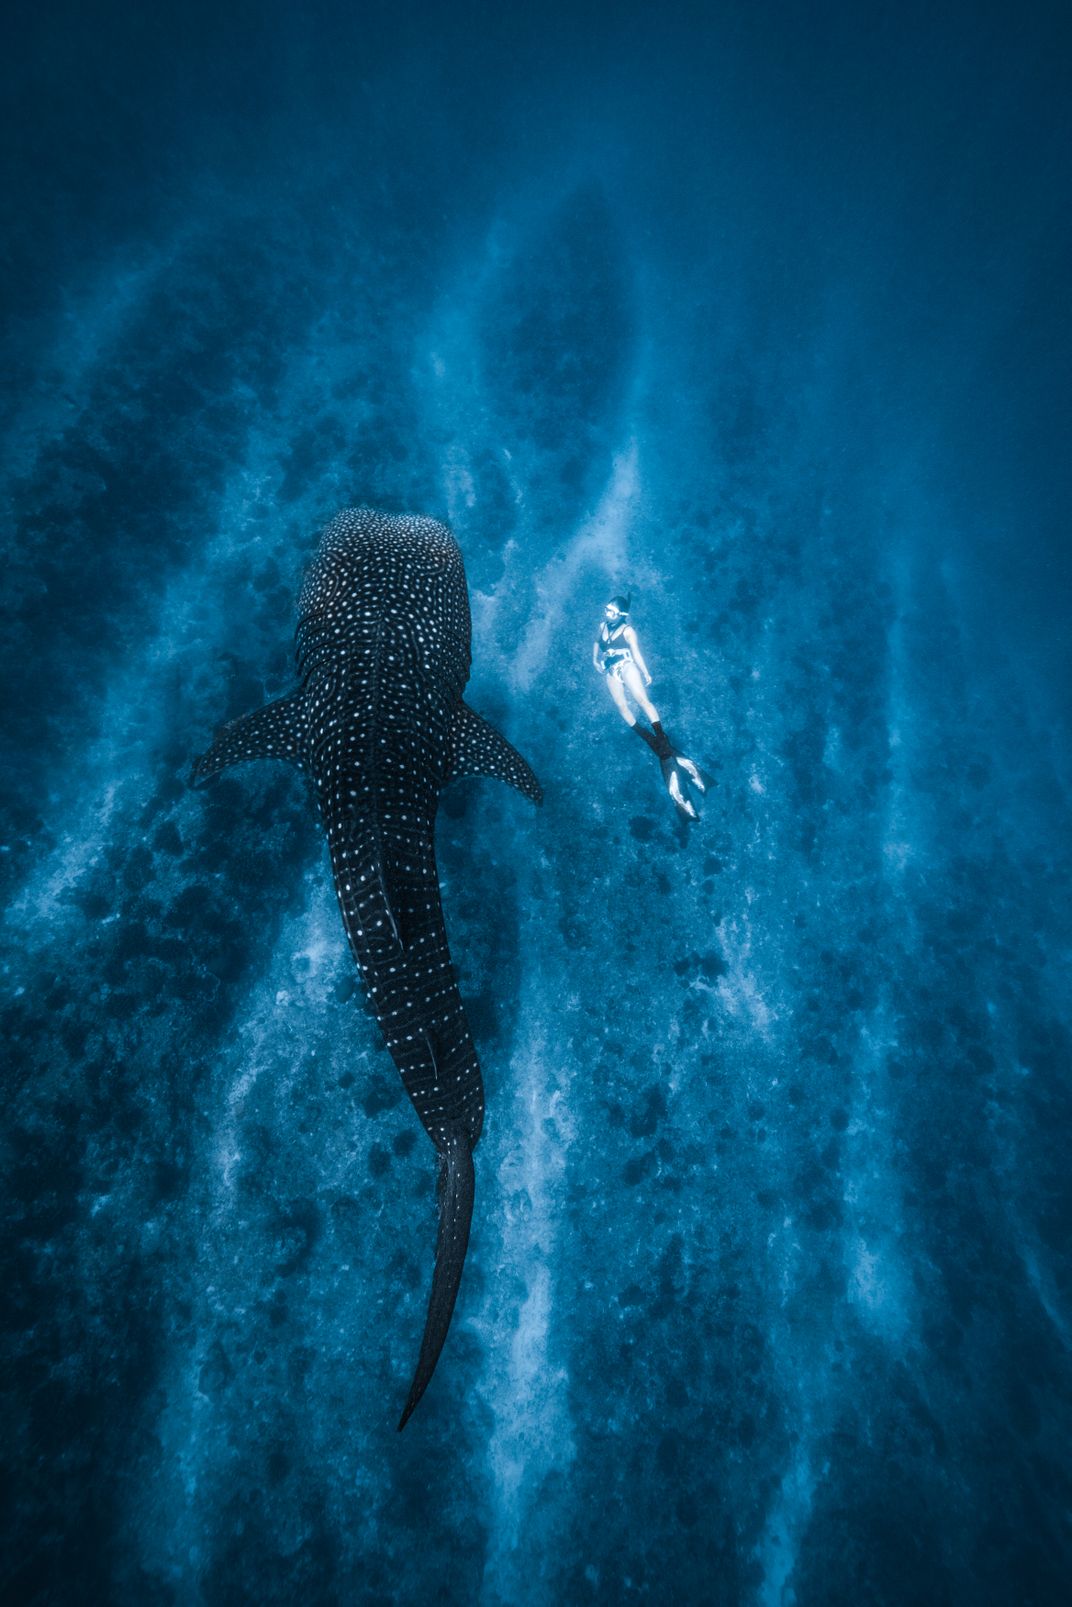 A diver encounters a majestic whale shark at the seafloor of the Maamigili Beru reefs